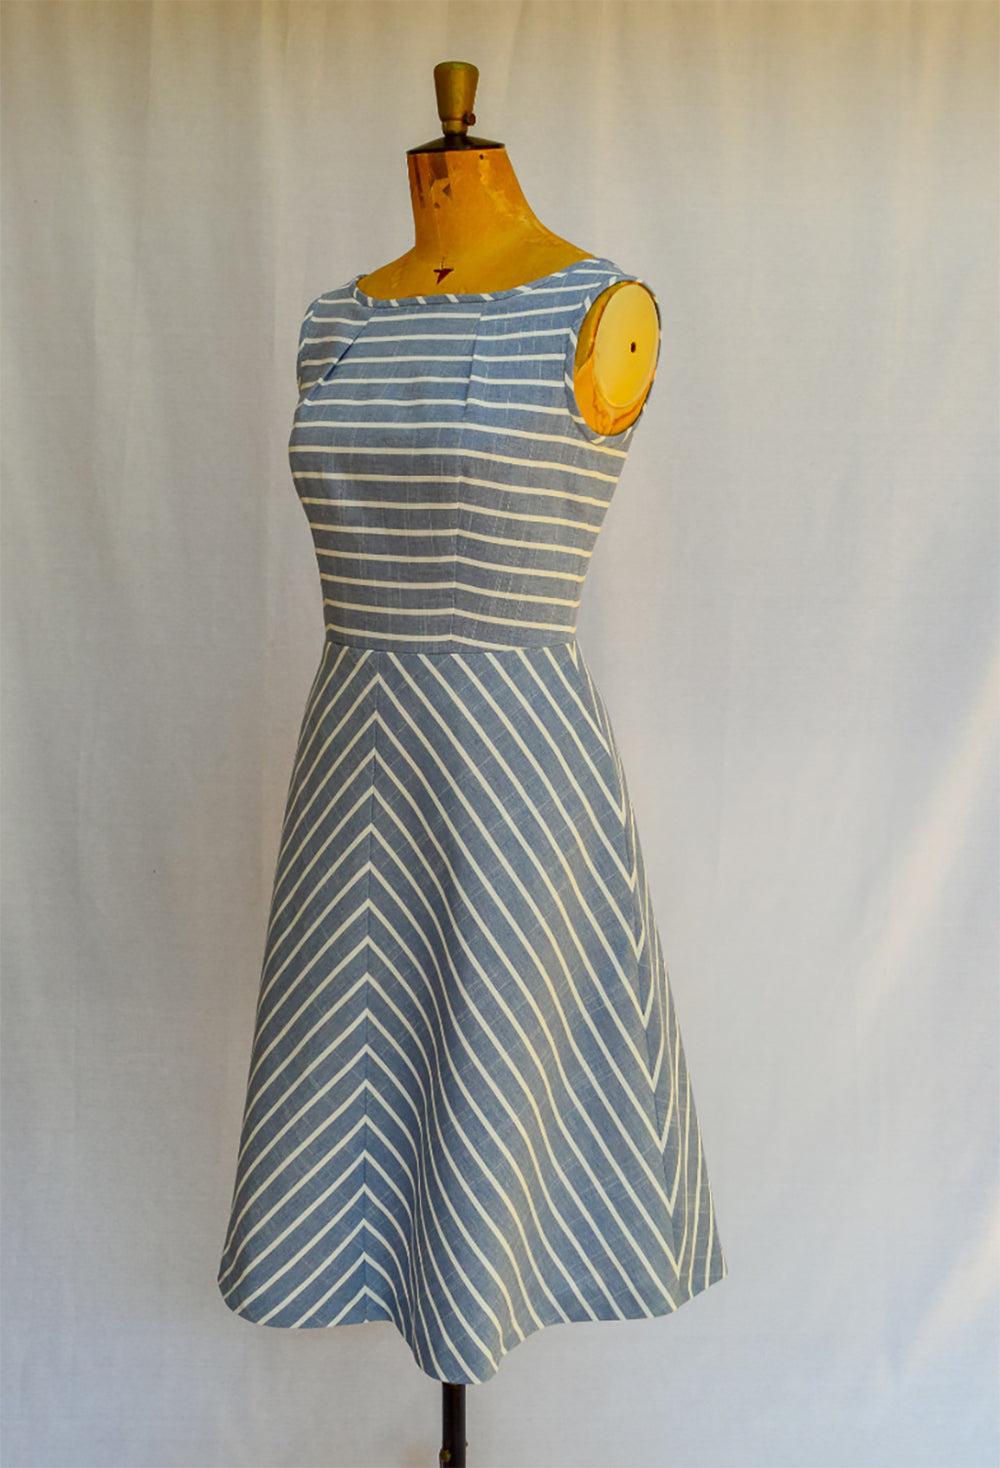 Mannequin wearing the Barcelona Dress sewing pattern from Maven Patterns on The Fold Line. A sleeveless dress pattern made in light to medium weight woven fabrics, featuring a boat neck, fitted at the waist with an A-line skirt, in-seam pockets, front and